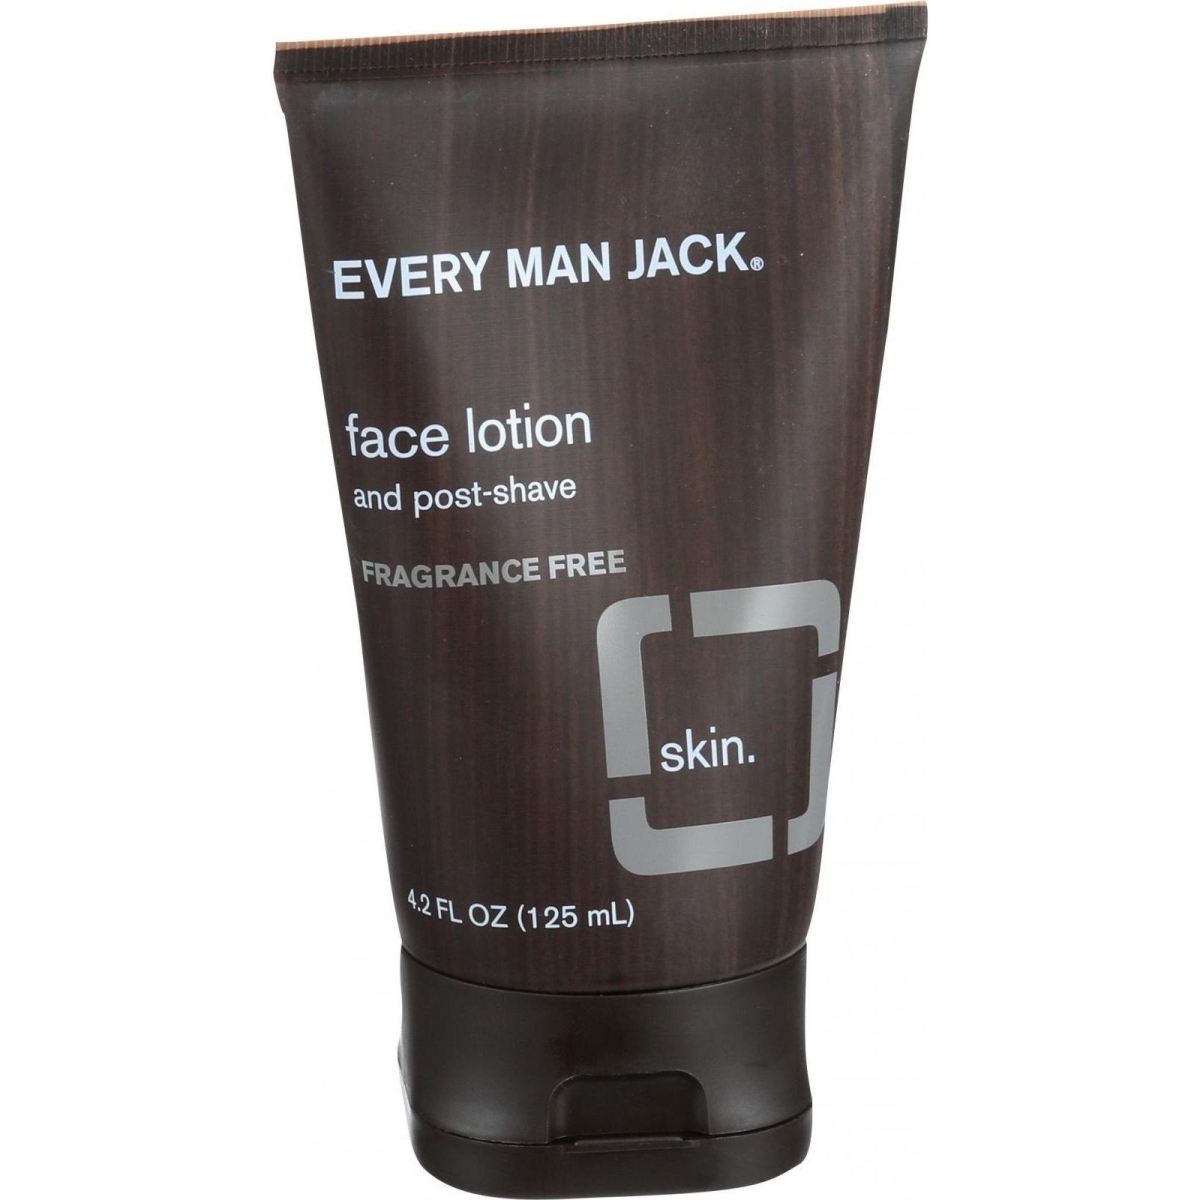 Hg0136895 4.2 Oz Face Lotion & Post Shave Fragrance Free